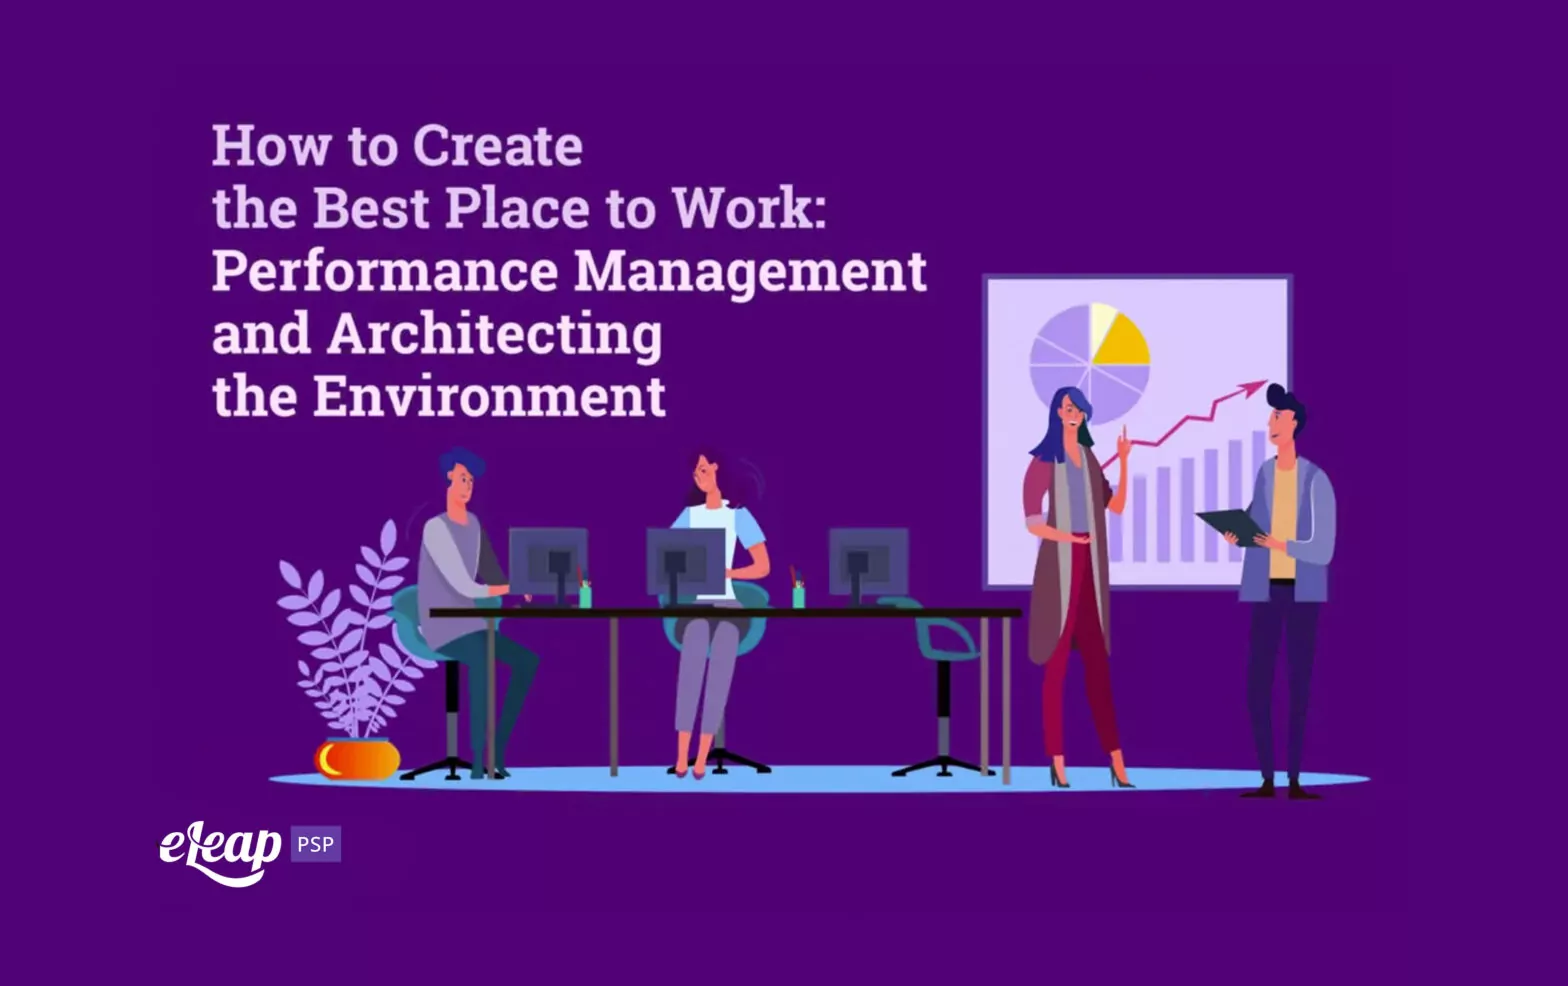 How to Create the Best Place to Work: Performance Management and Architecting the Environment